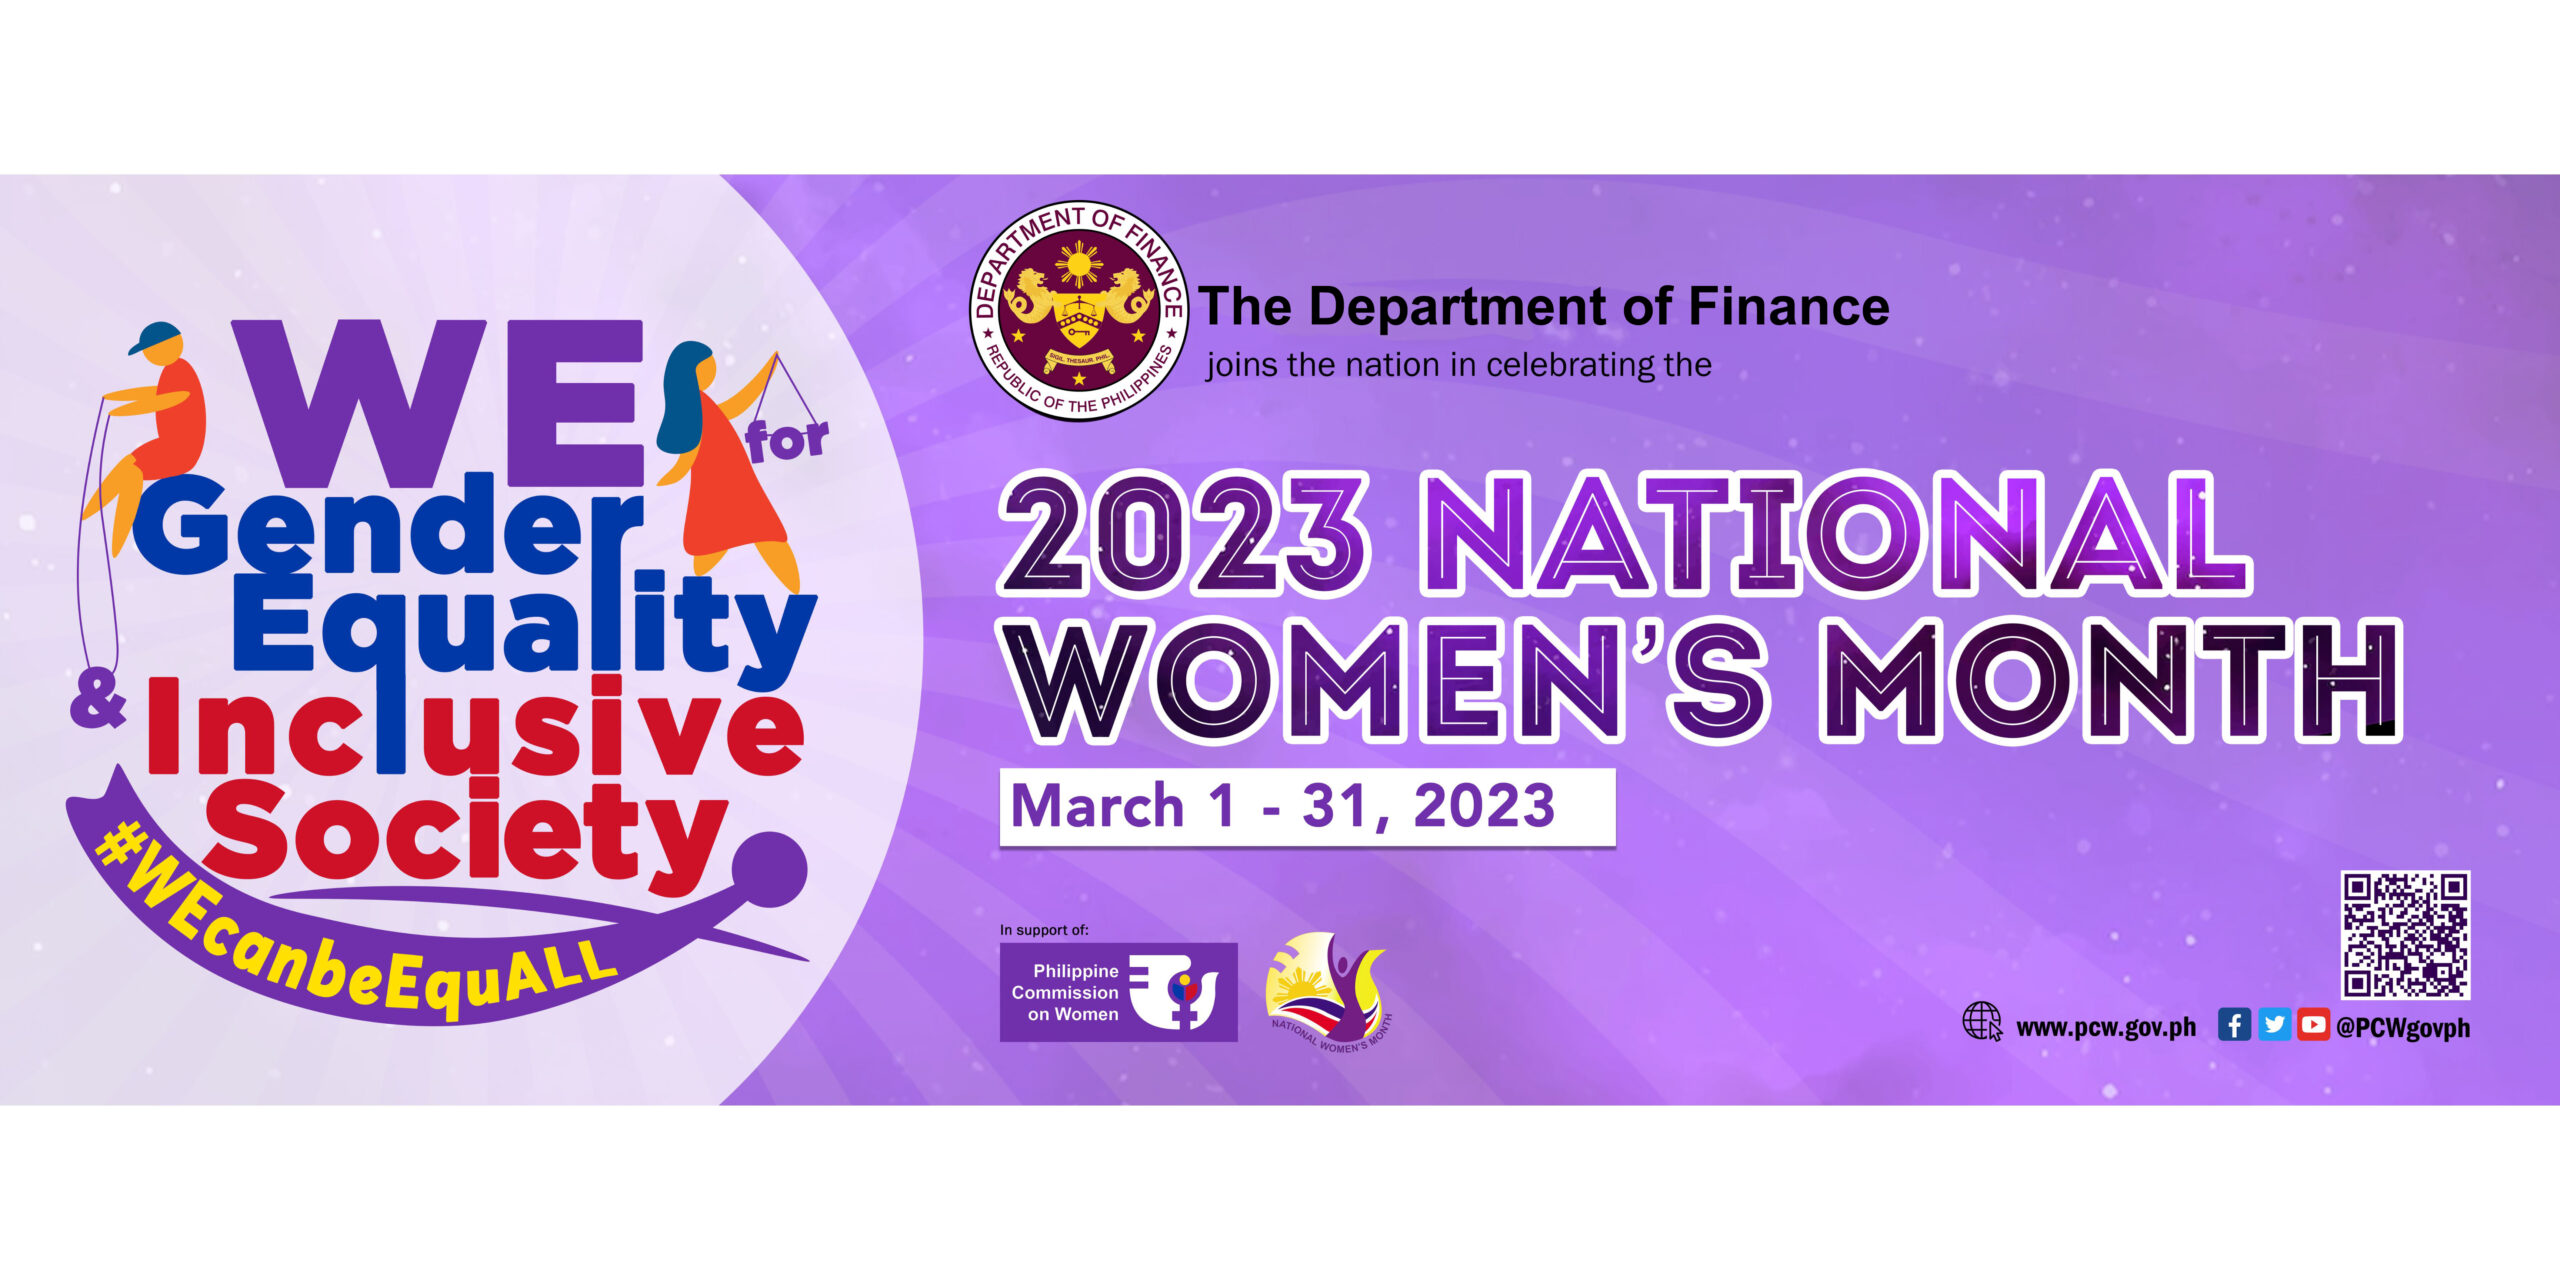 The Department of Finance joins the observance of the National Women's Month this March 2023 with the theme, "WE for gender equality and inclusive society," pursuant to Proclamation No. 224, s. 1988.  The theme focuses on emphasizing the need for compassionate and harmonized networks towards gender equality and women’s empowerment (GEWE).  #WEcanbeEquALL #NWMC2023 #HappyWomensMonth